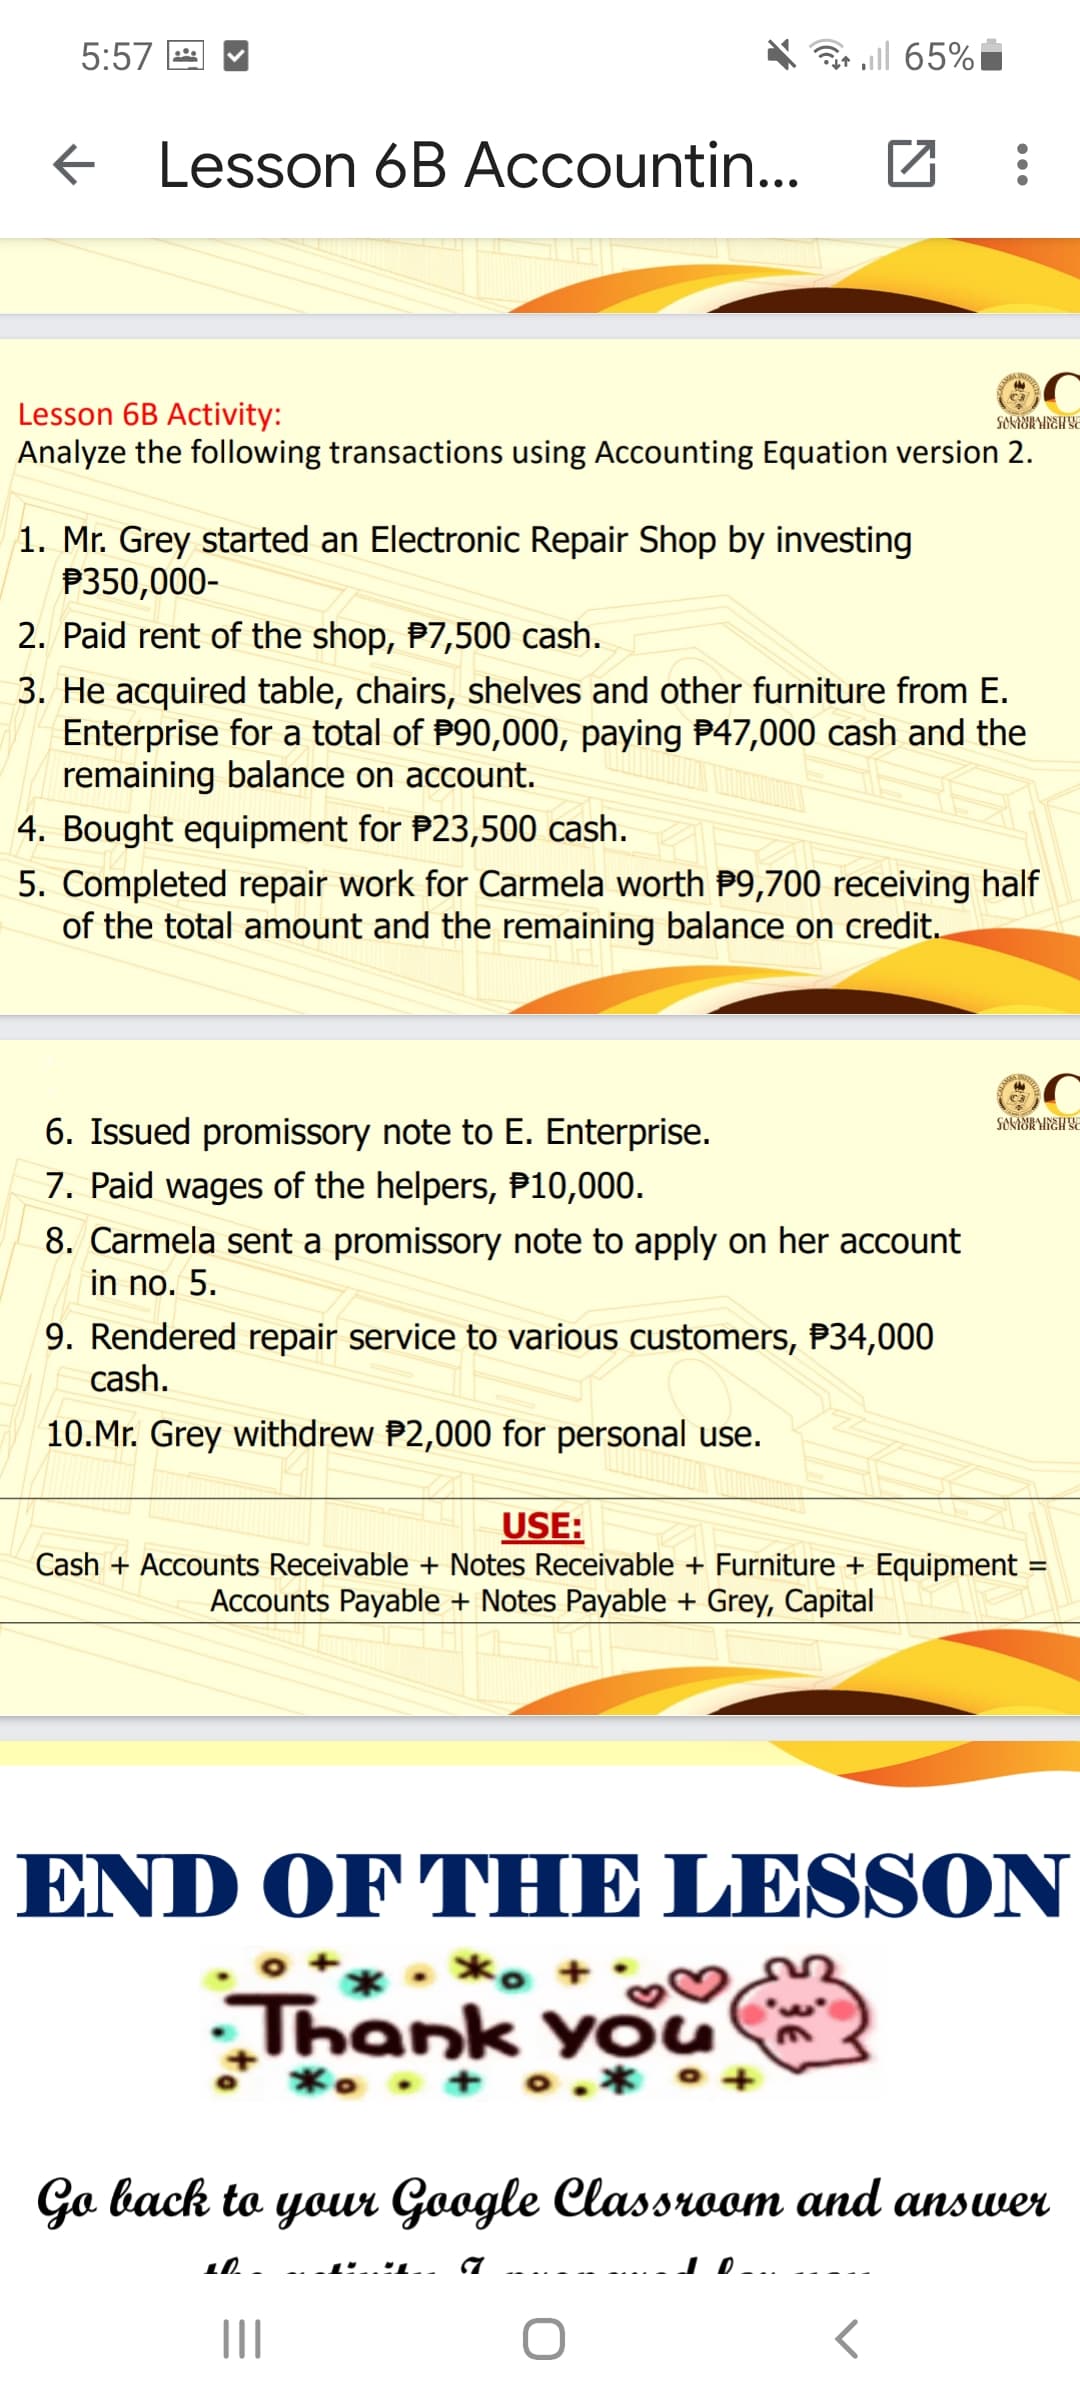 5:57 E
ell 65%
E Lesson 6B Accountin...
Lesson 6B Activity:
Analyze the following transactions using Accounting Equation version 2.
1. Mr. Grey started an Electronic Repair Shop by investing
P350,000-
2. Paid rent of the shop, P7,500 cash.
3. He acquired table, chairs, shelves and other furniture from E.
Enterprise for a total of P90,000, paying P47,000 cash and the
remaining balance on account.
4. Bought equipment for P23,500 cash.
5. Completed repair work for Carmela worth P9,700 receiving half
of the total amount and the remaining balance on credit.
6. Issued promissory note to E. Enterprise.
7. Paid wages of the helpers, P10,000.
8. Carmela sent a promissory note to apply on her account
in no. 5.
9. Rendered repair service to various customers, P34,000
cash.
10.Mr. Grey withdrew P2,000 for personal use.
USE:
Cash + Accounts Receivable + Notes Receivable + Furniture + Equipment
Accounts Payable + Notes Payable + Grey, Capital
END OF THE LESSON
*. +
Thank You
*. . + o.* •+
дa back to youn Google Classmчоат аnd answeен
1.1.
II
